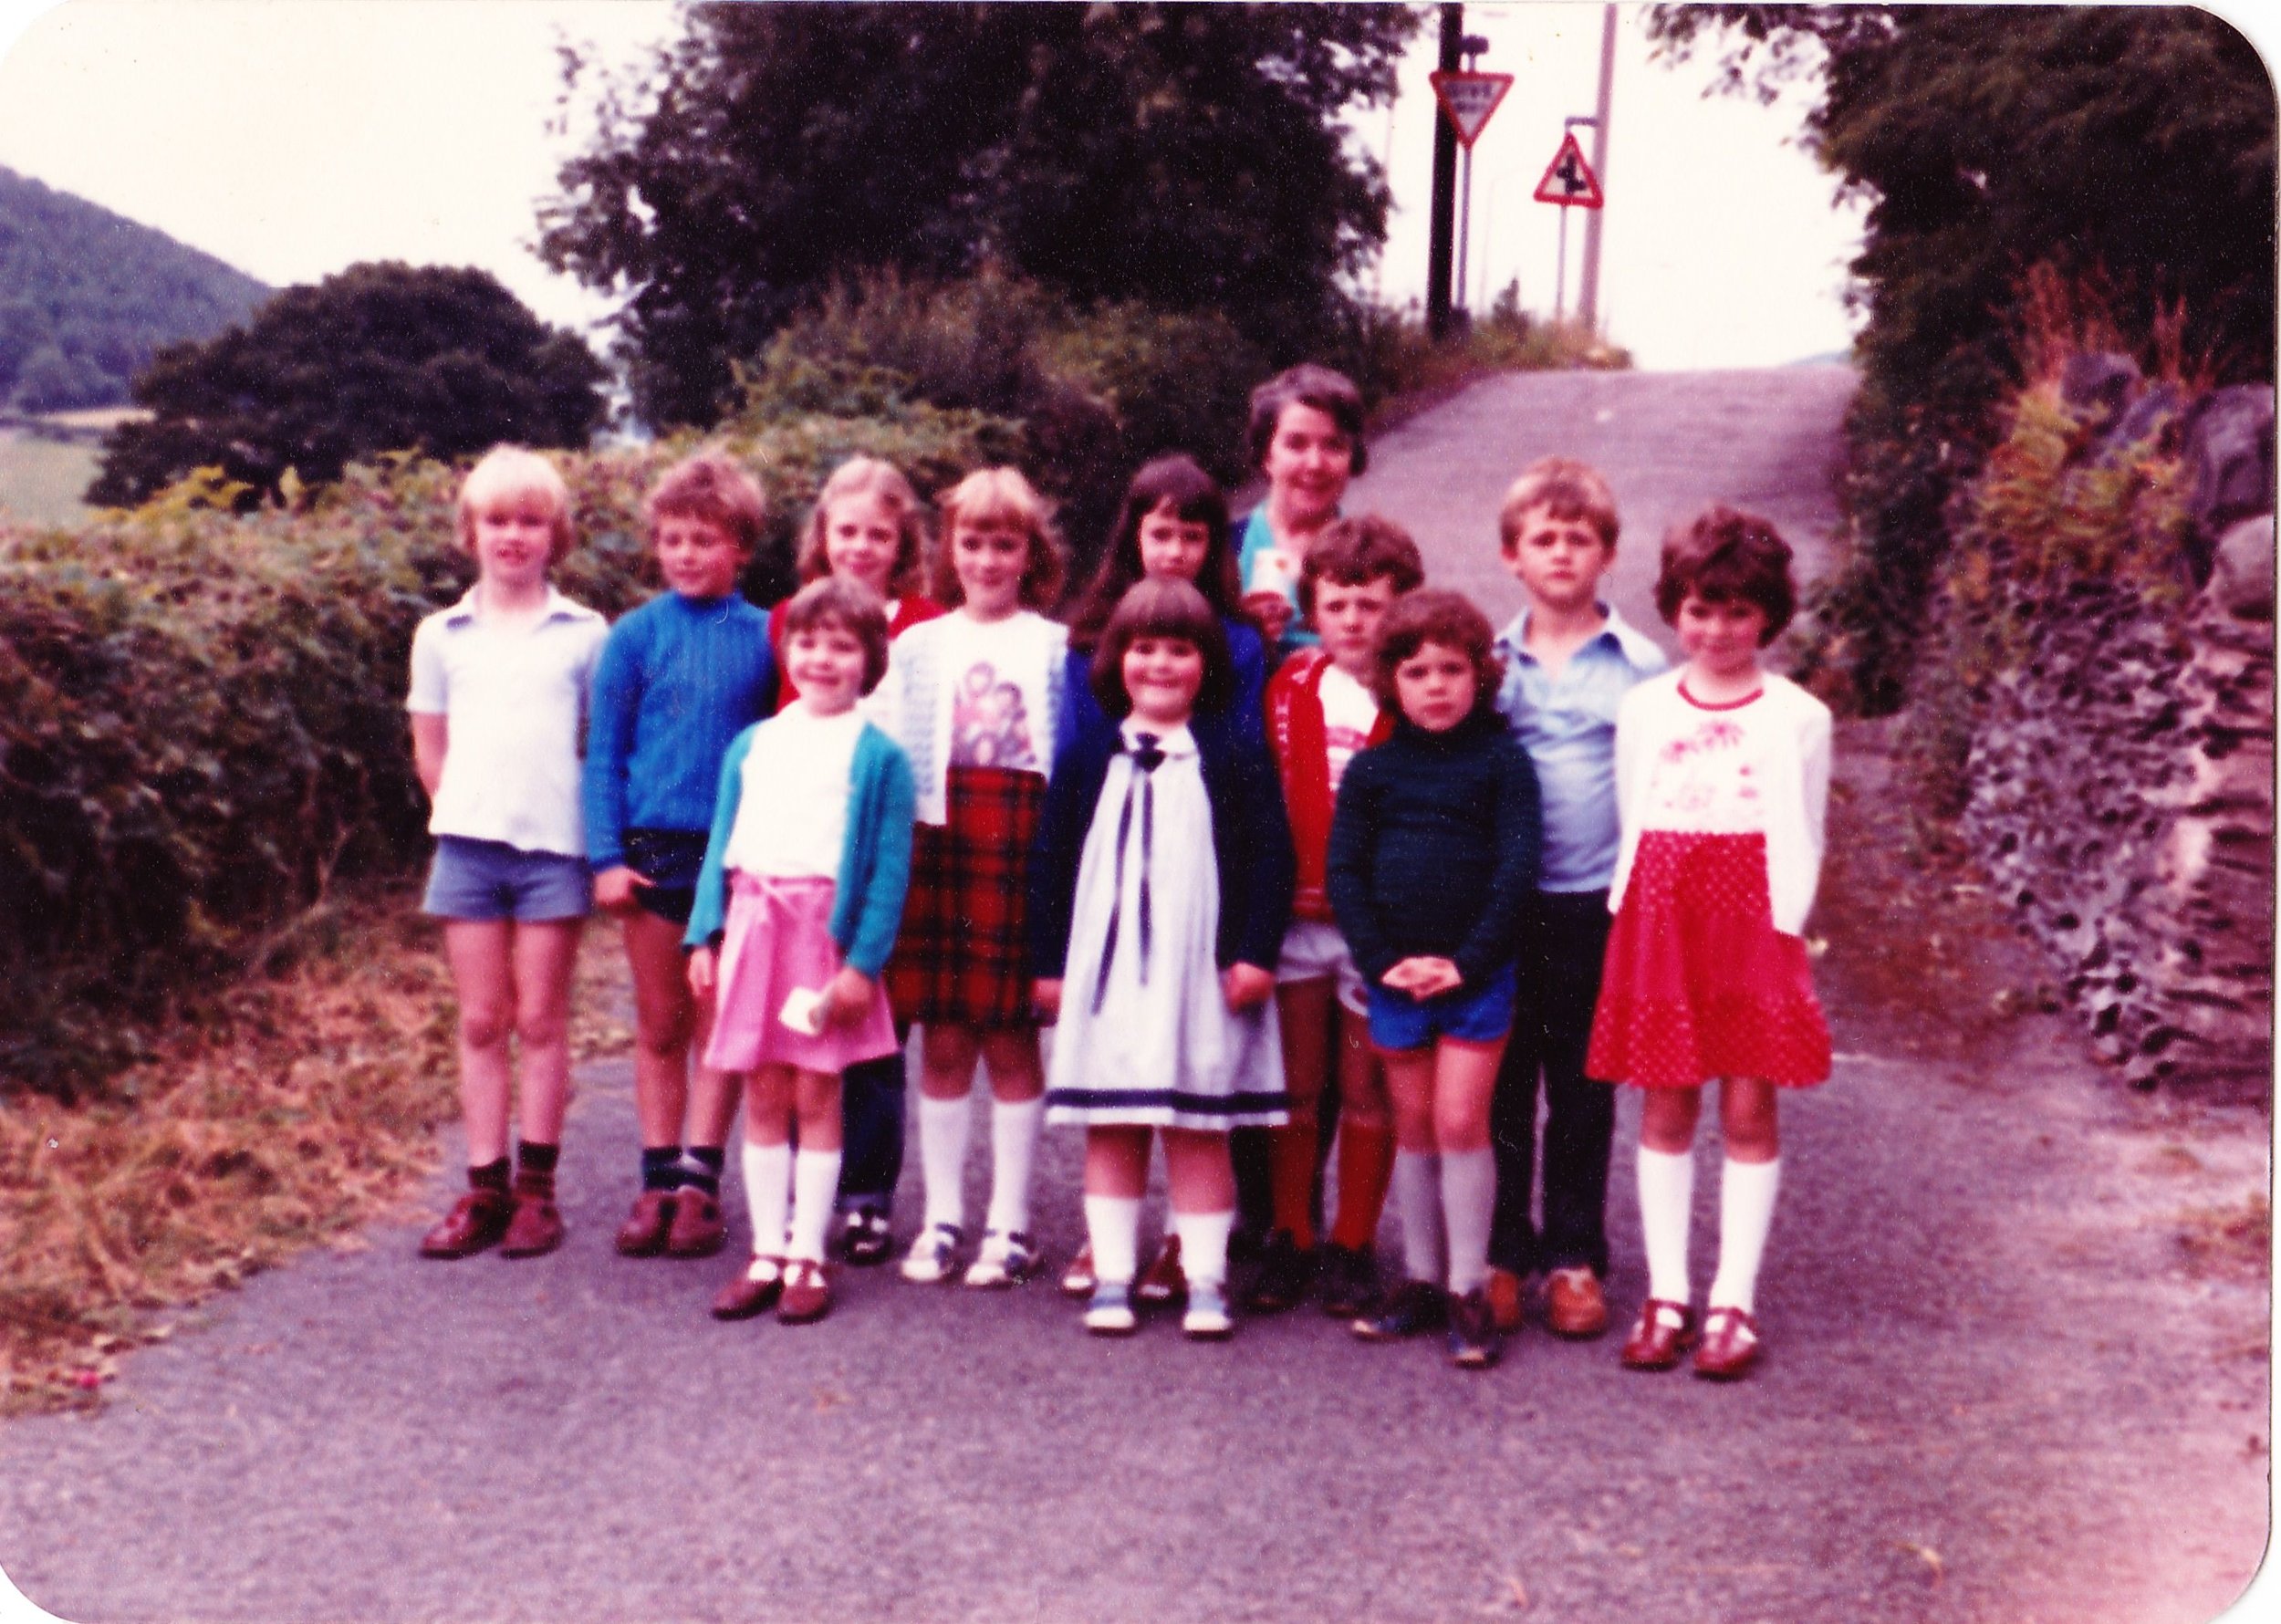 Gwladys school party to see new frogs 1981.jpg